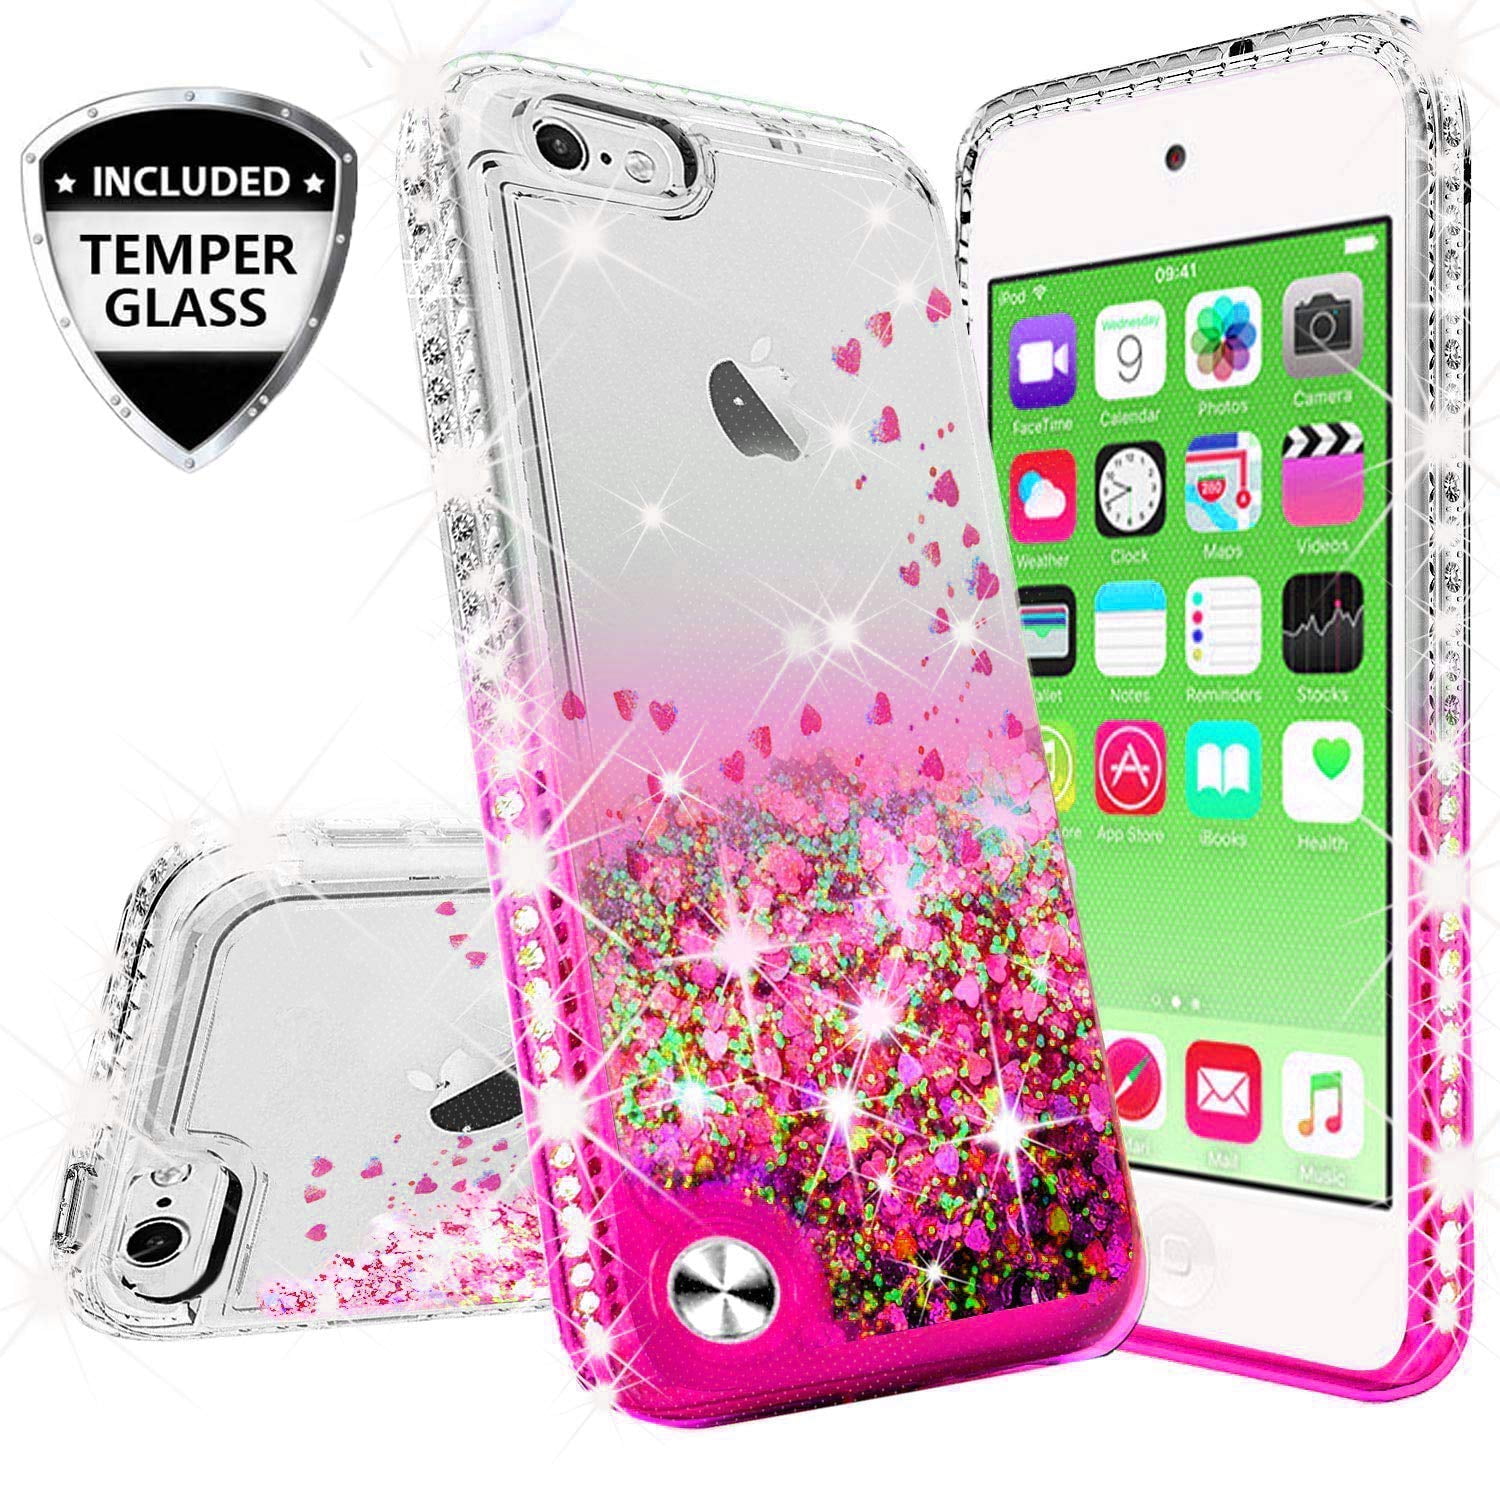 Compatible for Apple iPhone 8 Case, iPhone 7 Case, with [Temper Glass Screen Protector] SOGA Diamond Glitter Liquid Quicksand Cover Cute Girl Women Phone Case [Cear/Pink]